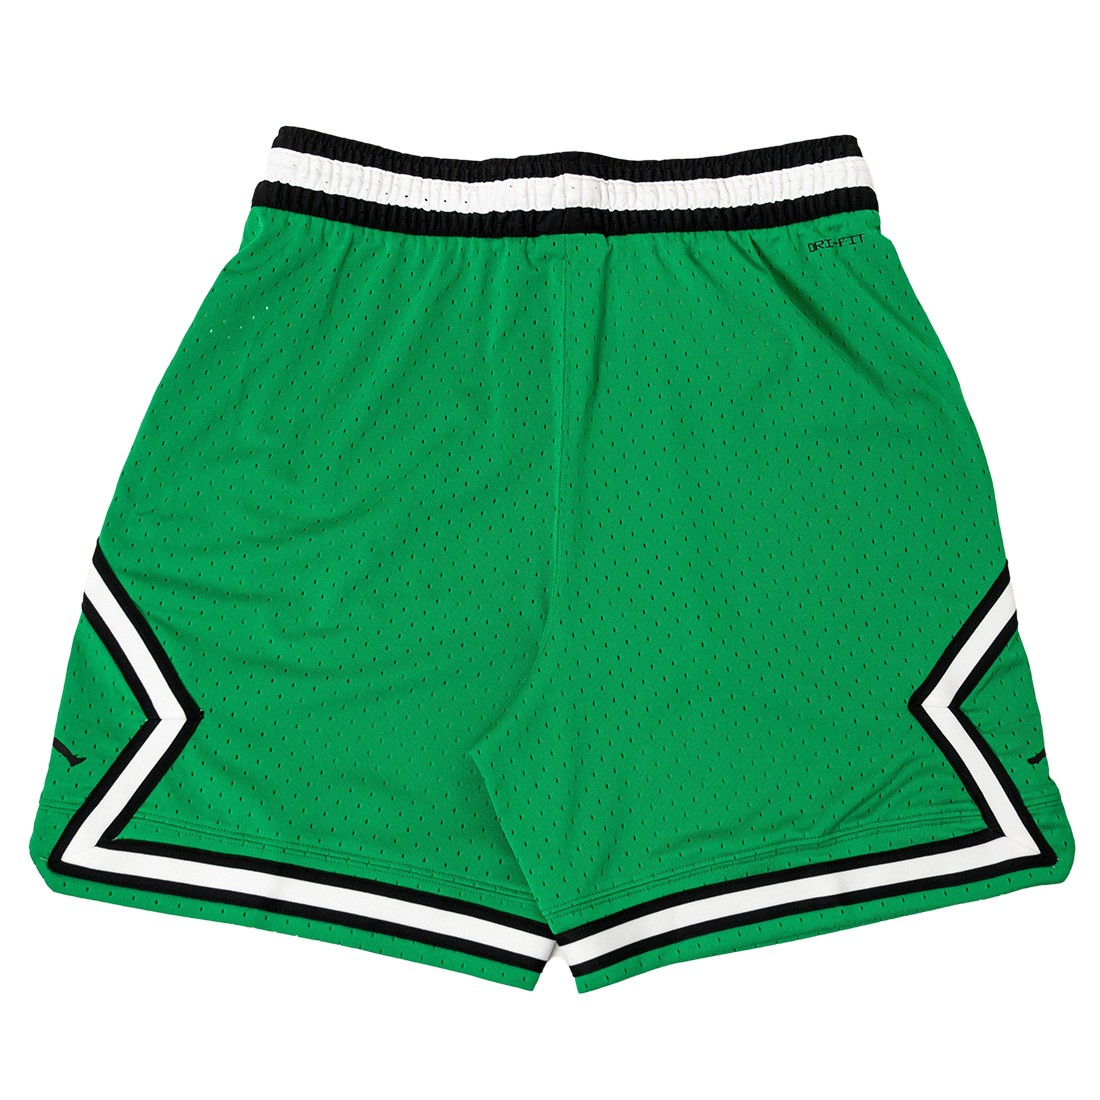 Nike Air Ship Every Game - You Got Your Lucky Shorts On?